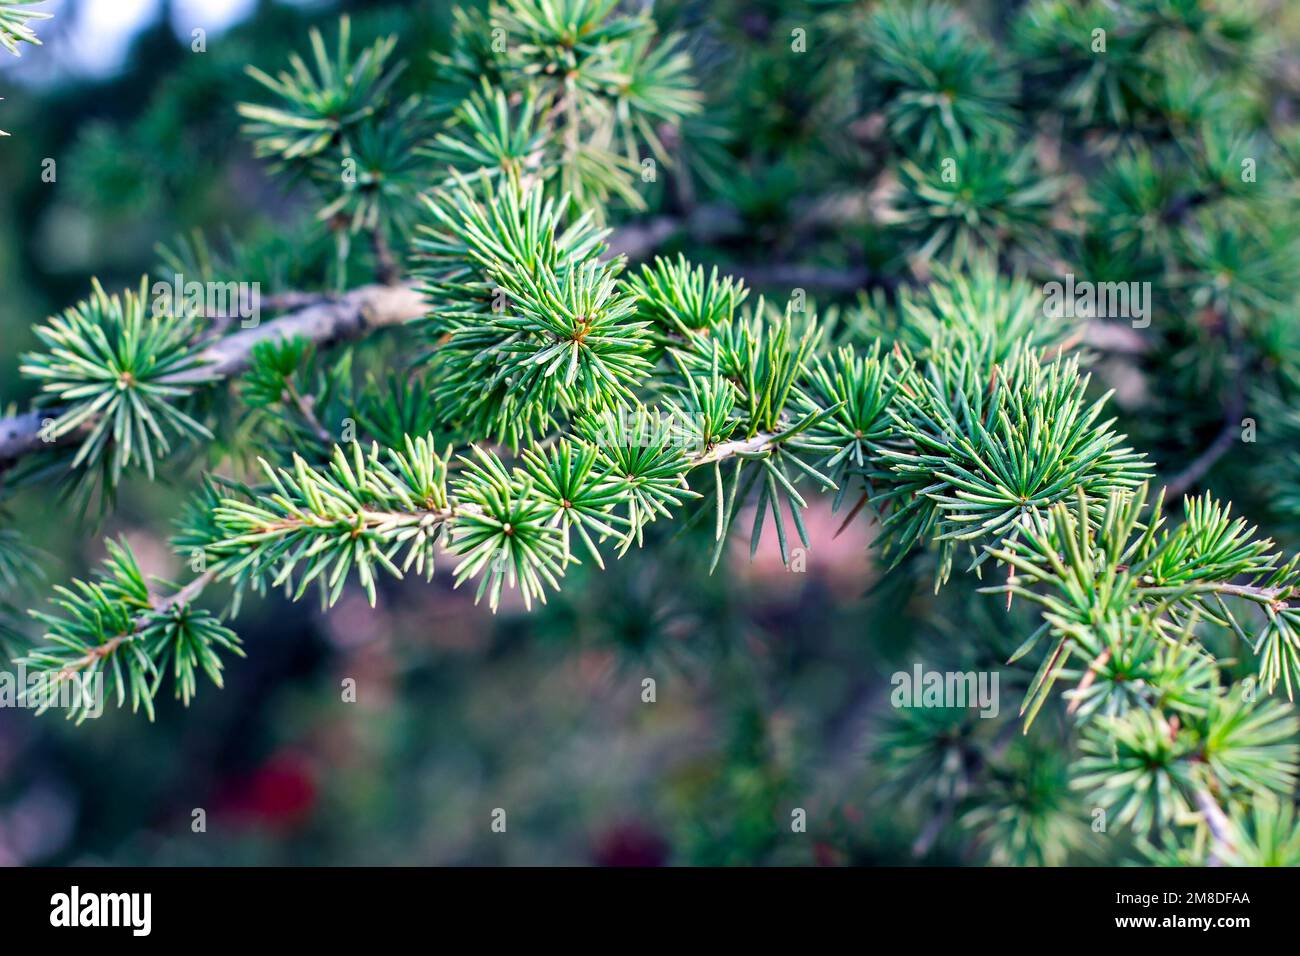 Bright green coniferous larch tree branches with needle leaves in the forest close up. Stock Photo